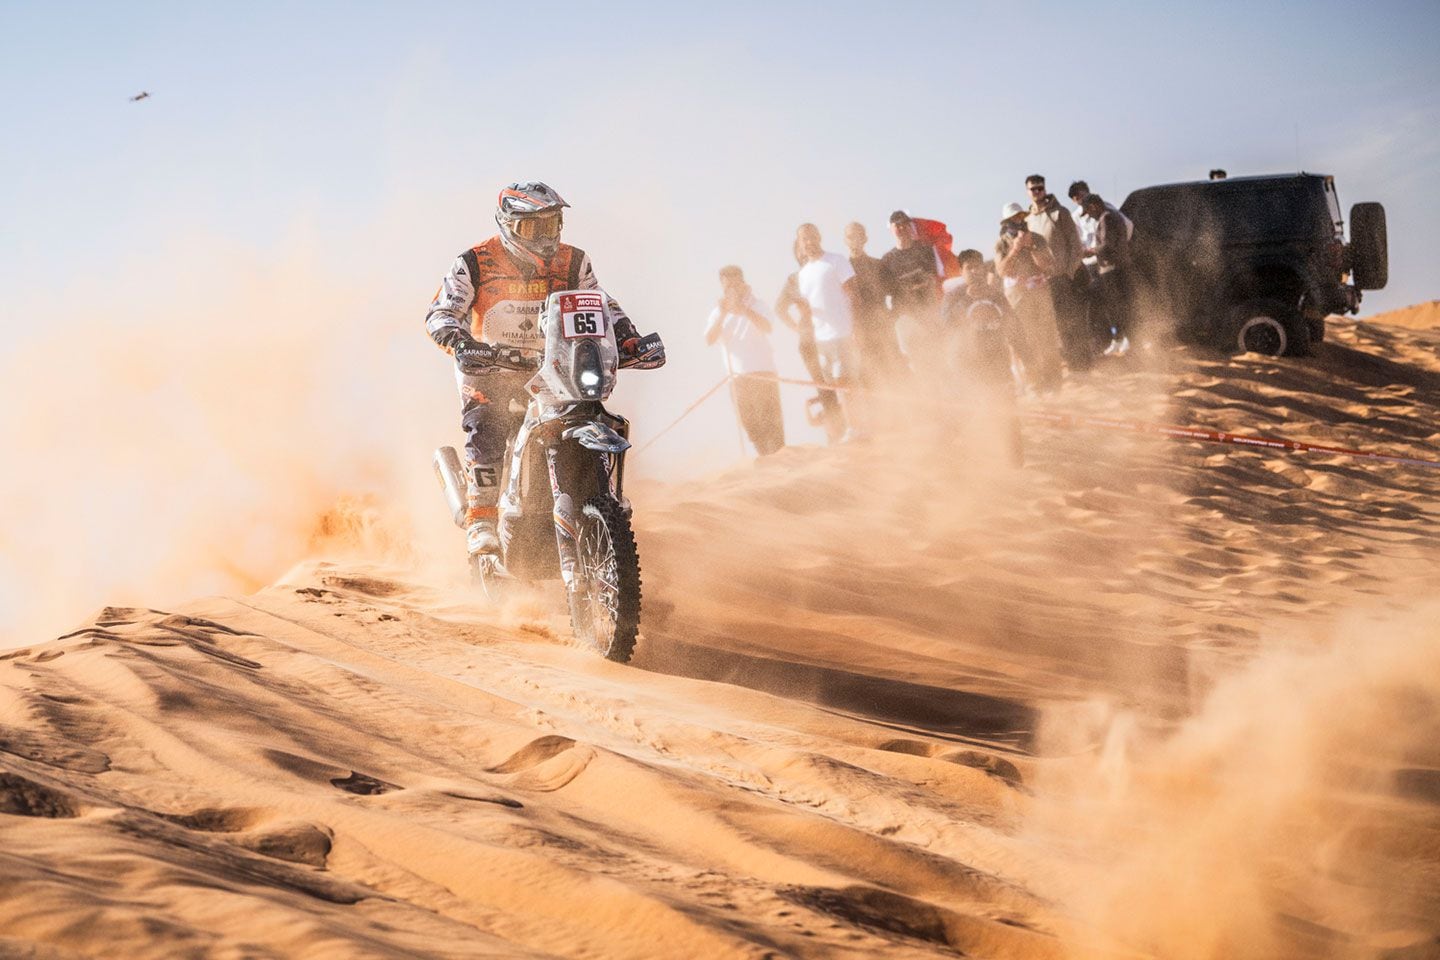 Guillaume Chollet of the Xraids Experience Team KTM crests a dune during the Stage 4.